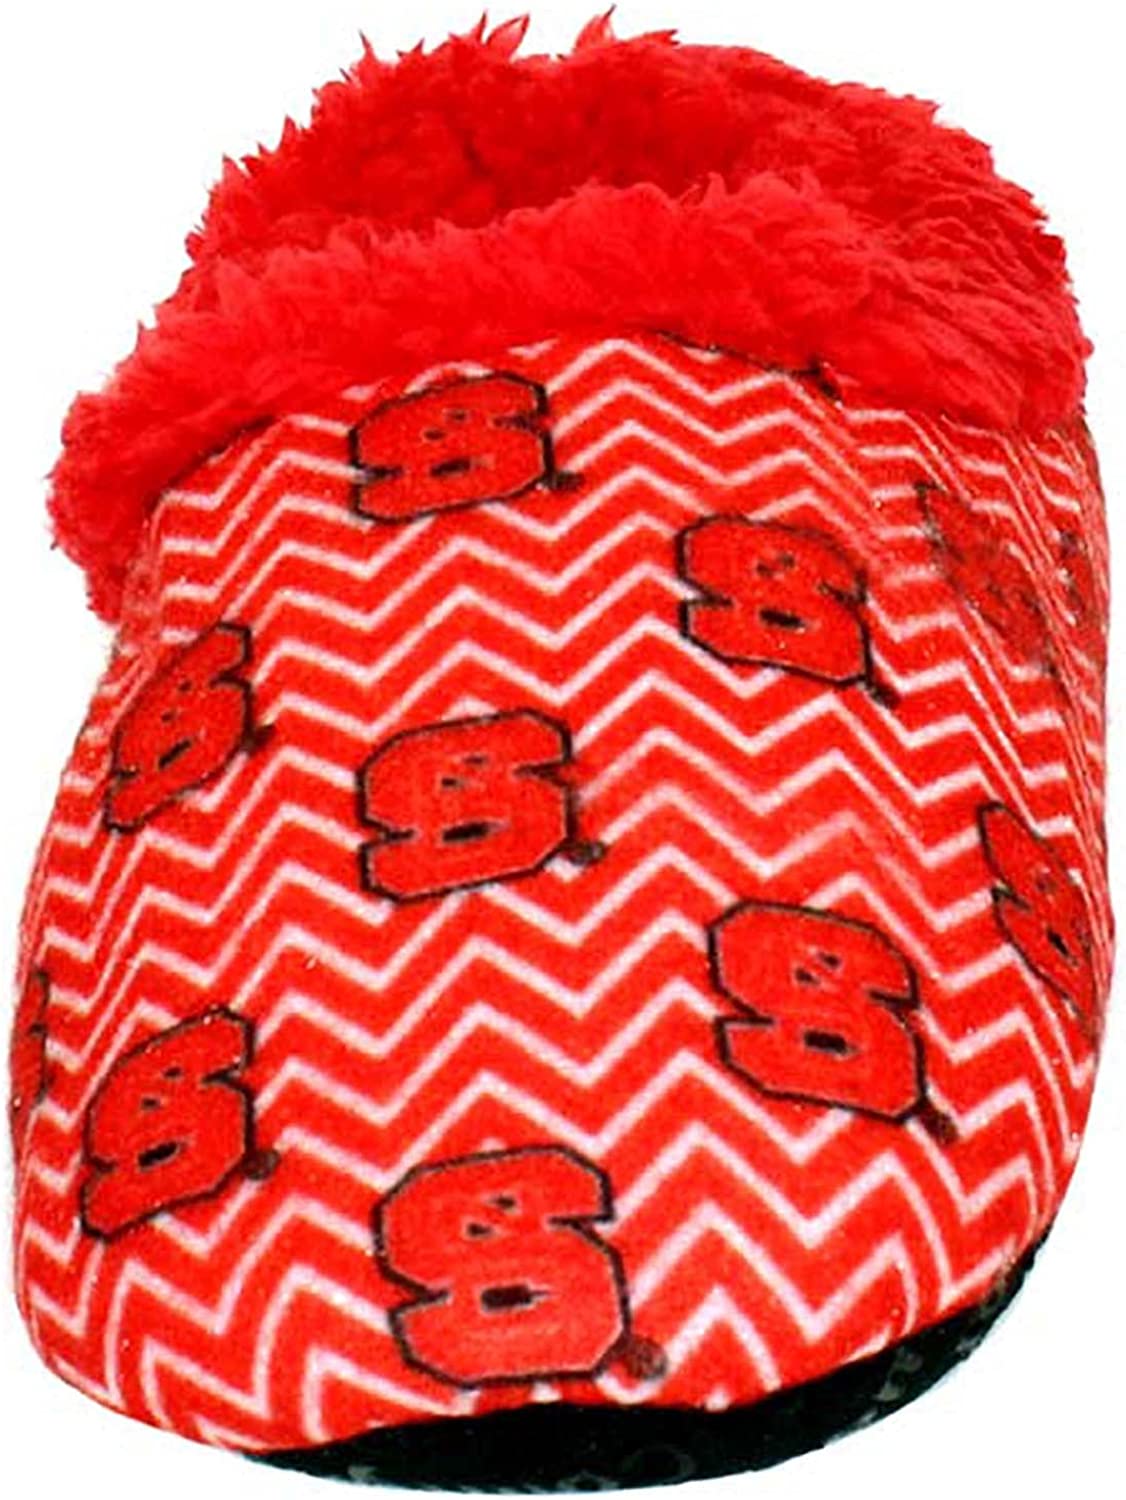 Comfy Feet Everything Comfy NC State Wolfpack Chevron Slip On Slipper LG - image 4 of 5